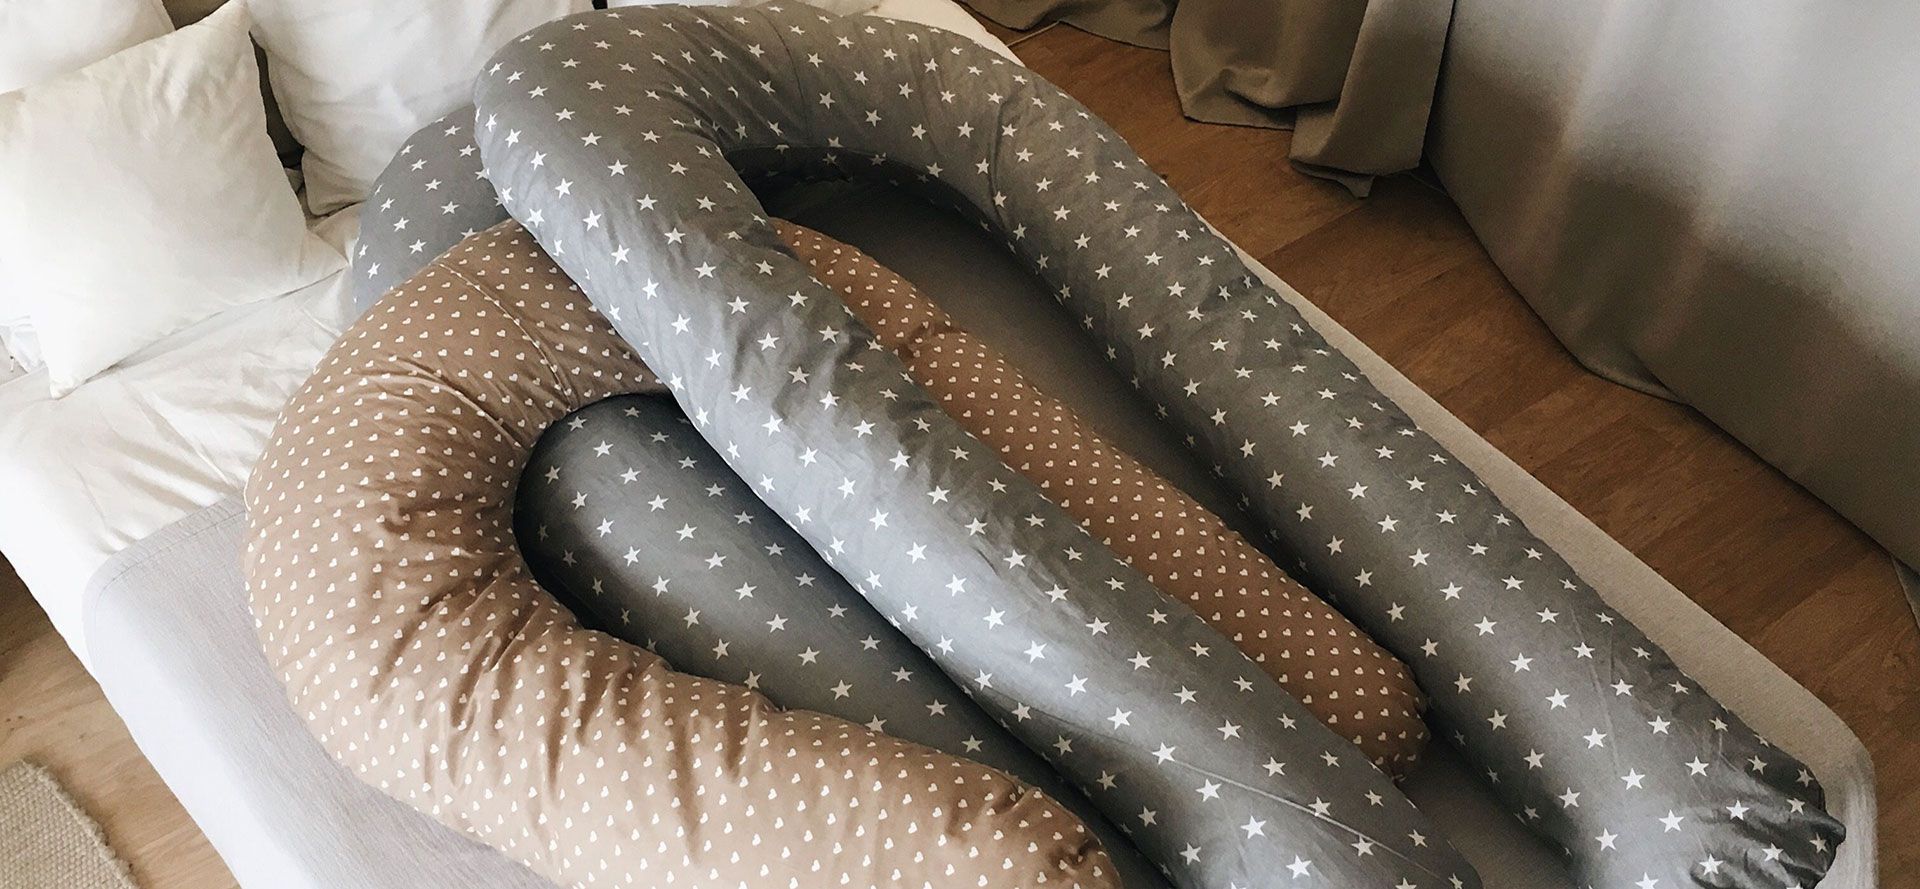 Type Of Pillow That Is The Best For Side Sleepers.